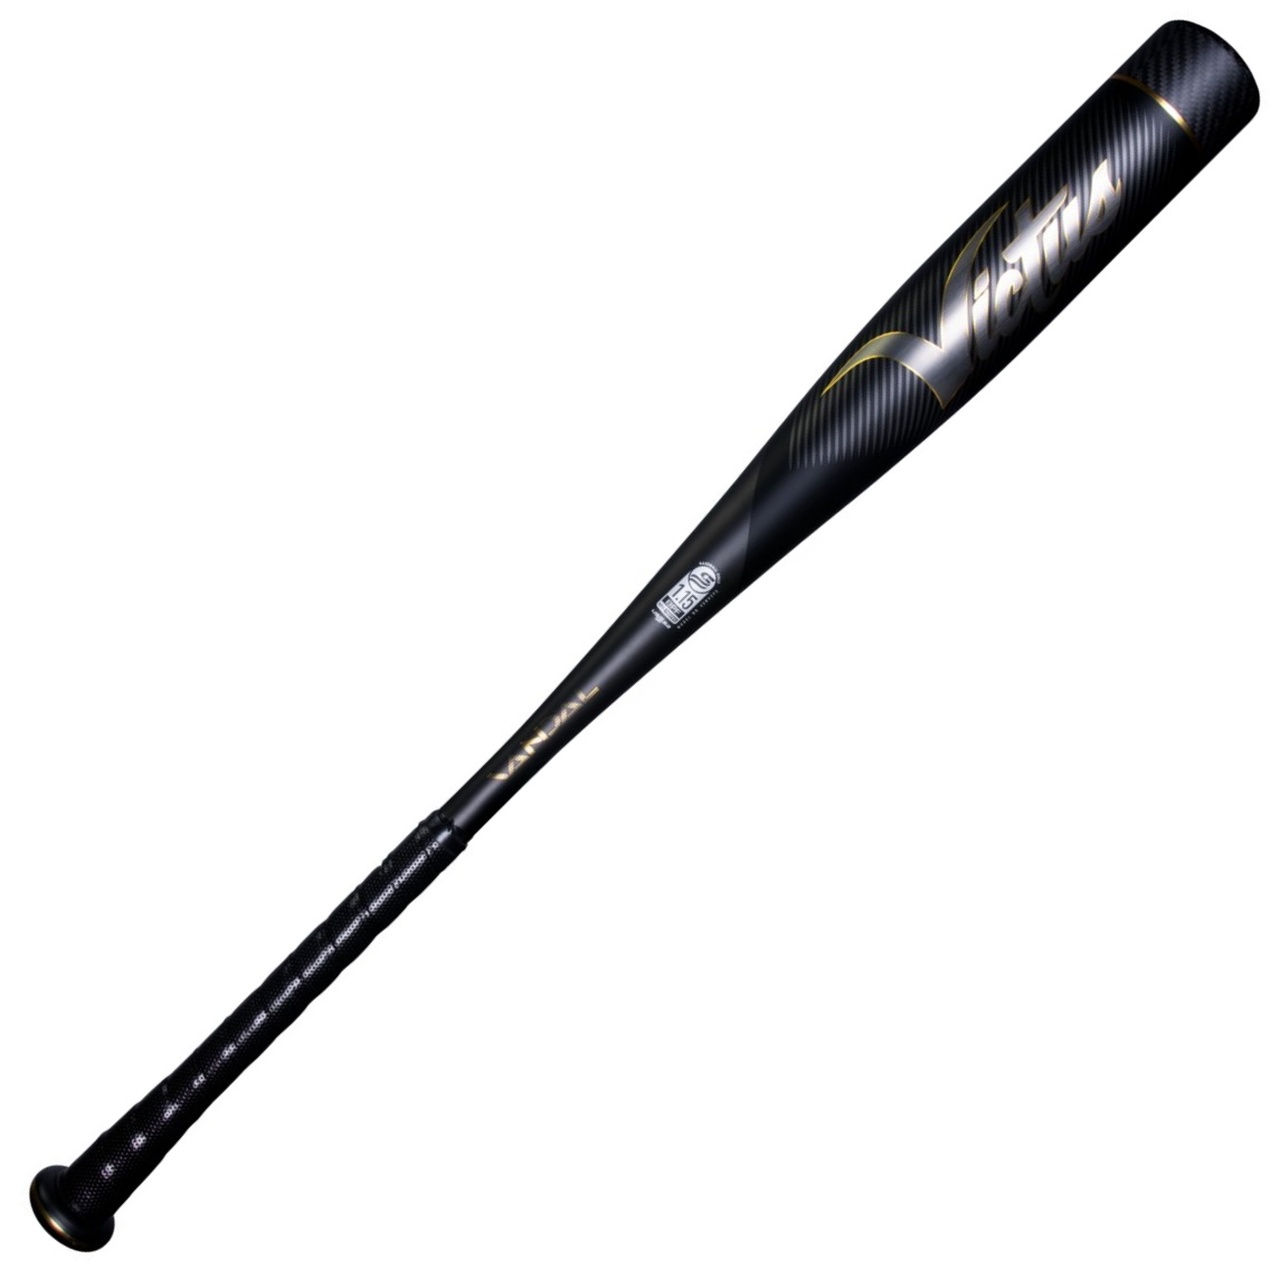 In baseball, speed is everything. That’s why Victus designed the Vandal using a state of-the-art VXP alloy with a ringless barrel containing multi-variable wall thickness and a 2 inch carbon composite barrel end. The result is an ultra-balanced bat and one-piece aluminum hybrid bat that has a low M.O.I. for lightning-fast power with every swing.The Vandal has a micro-perforated soft-touch grip and a pro-tapered handle that gives you control to attack the game from every angle and take advantage of the huge sweet spot. Speed never looked better.  Ringless barrel design made of multi-variable wall thickness Carbon composite barrel end creates an ultra-light swing weight for maximum bat speed One-piece hybrid design engineered and built with the highest alloy grade available Pro-tapered handle with micro-perforated touch grip for more top hand control and an ergonomic fit for comfort 2 5/8 inch barrel diameter BBCOR certified     